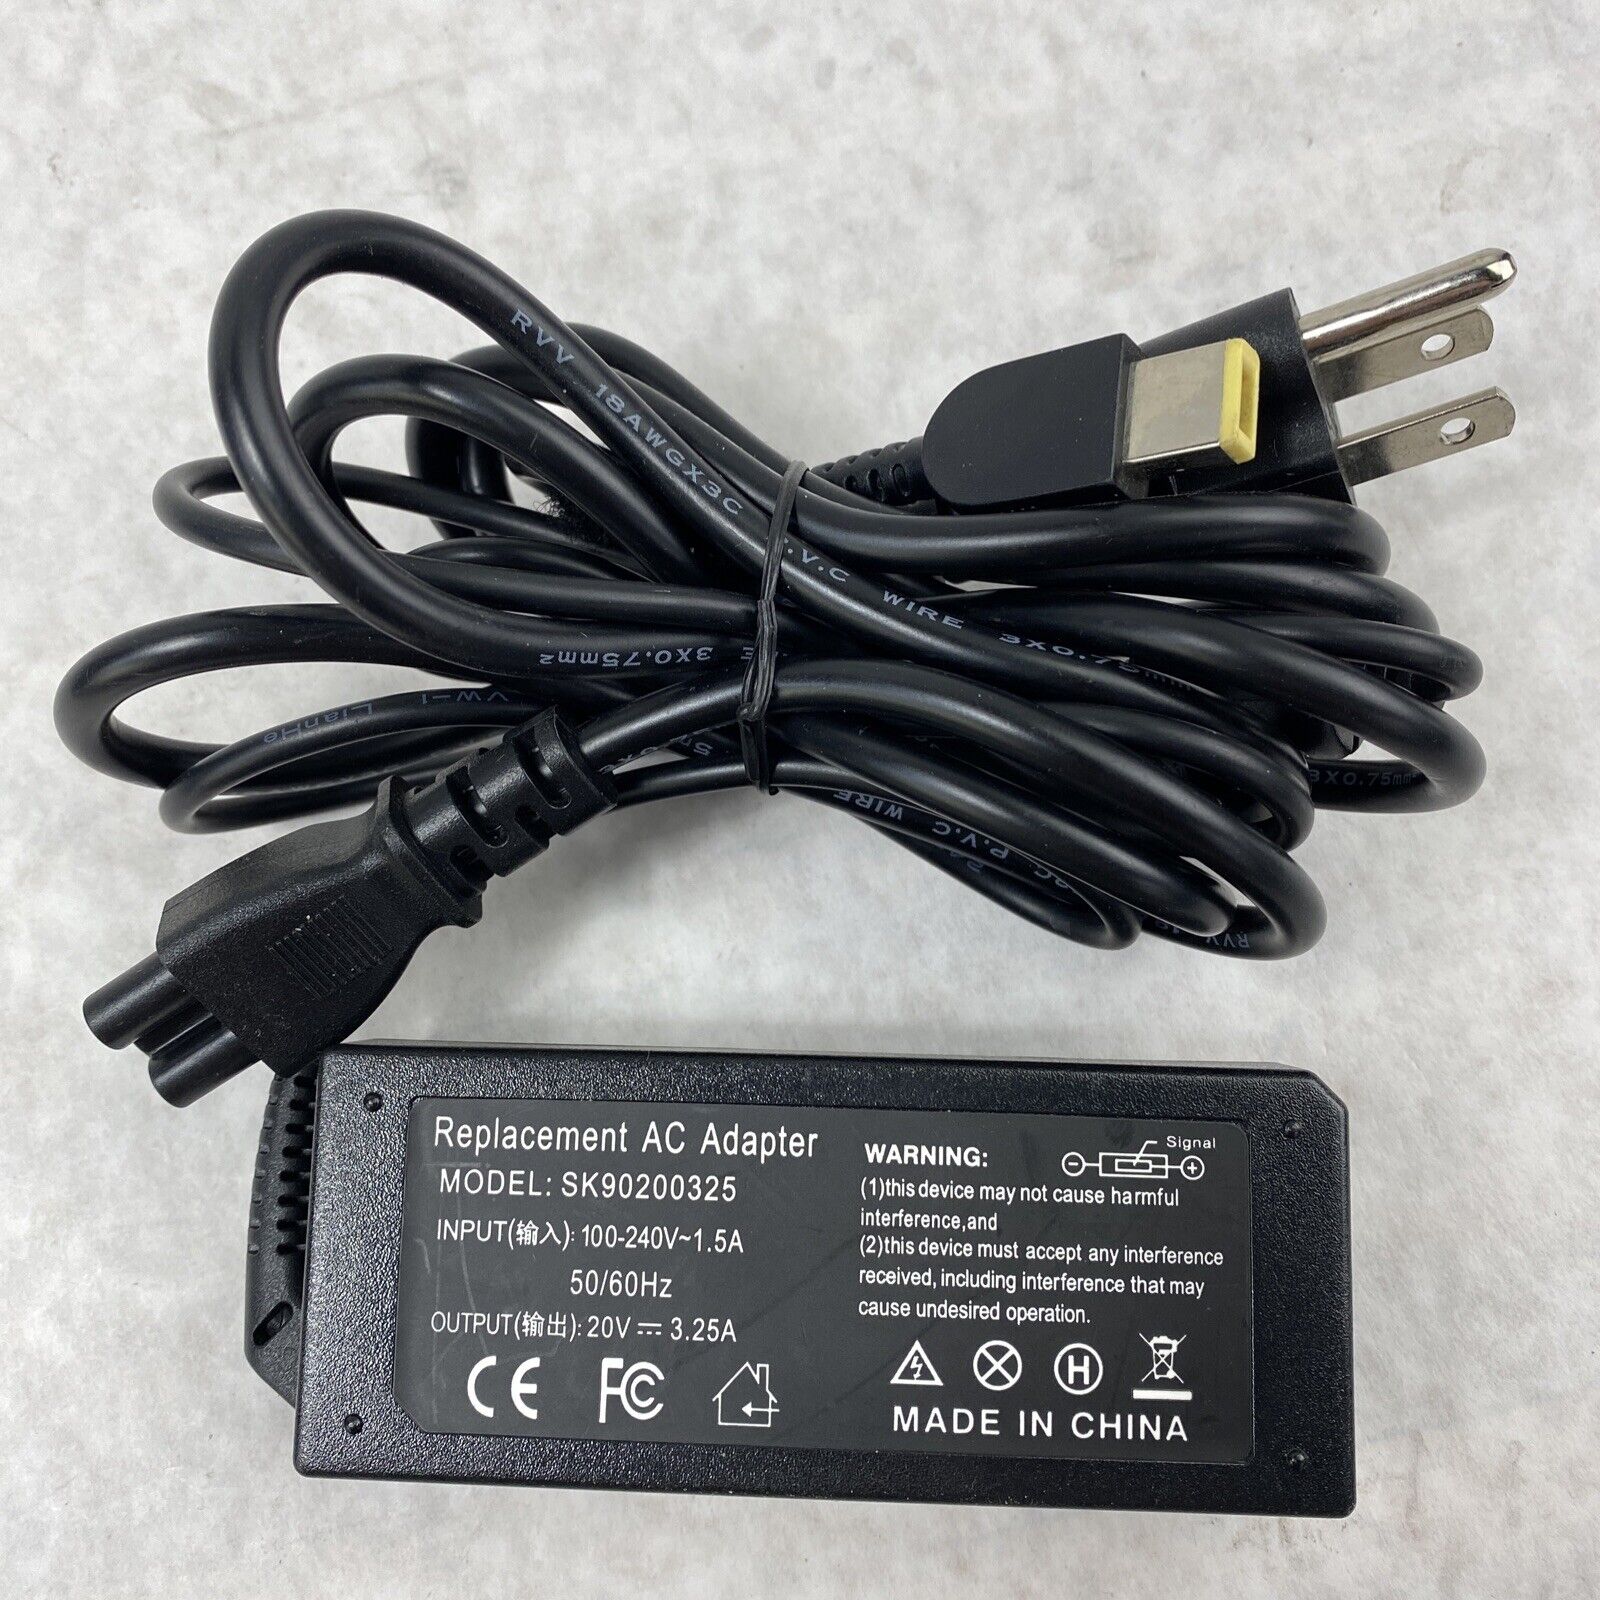 AC Power Adapter SK90200325 Replacement 20V 3.25A for Lenovo Square Tip 65w